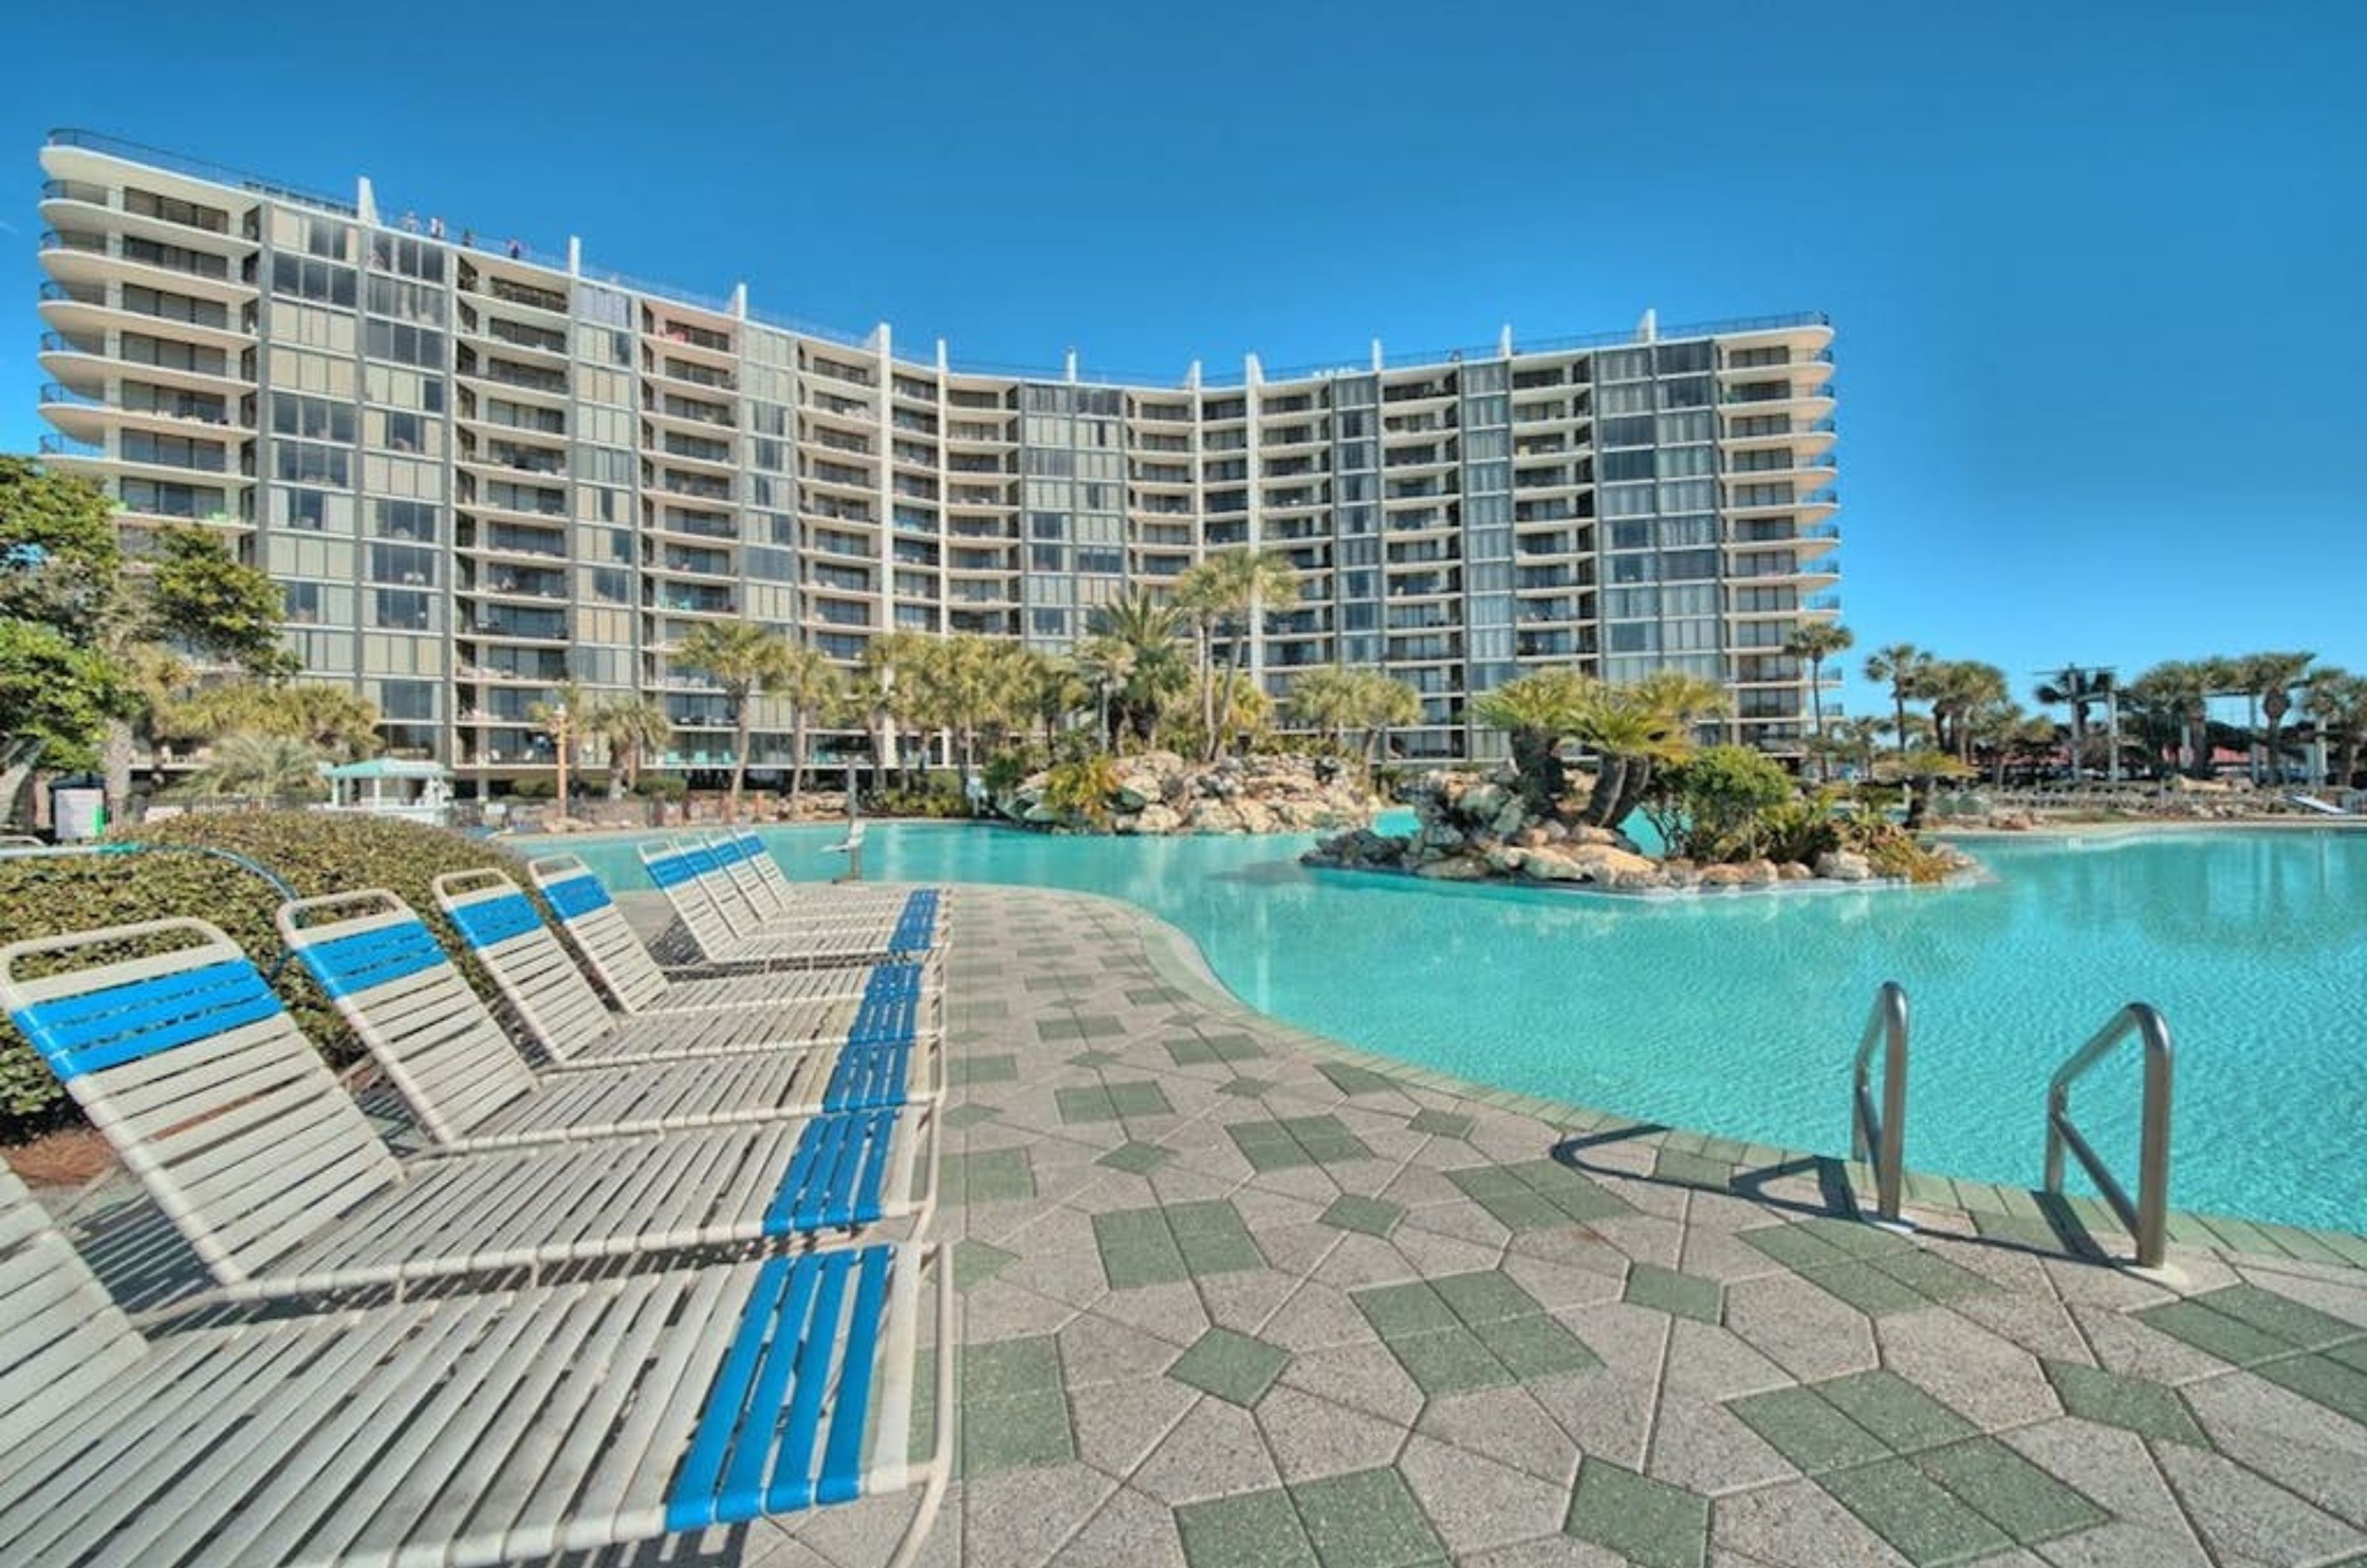 The outdoor pool in front of Edgewater Beach and Golf Resort in Panama City Beach Florida	